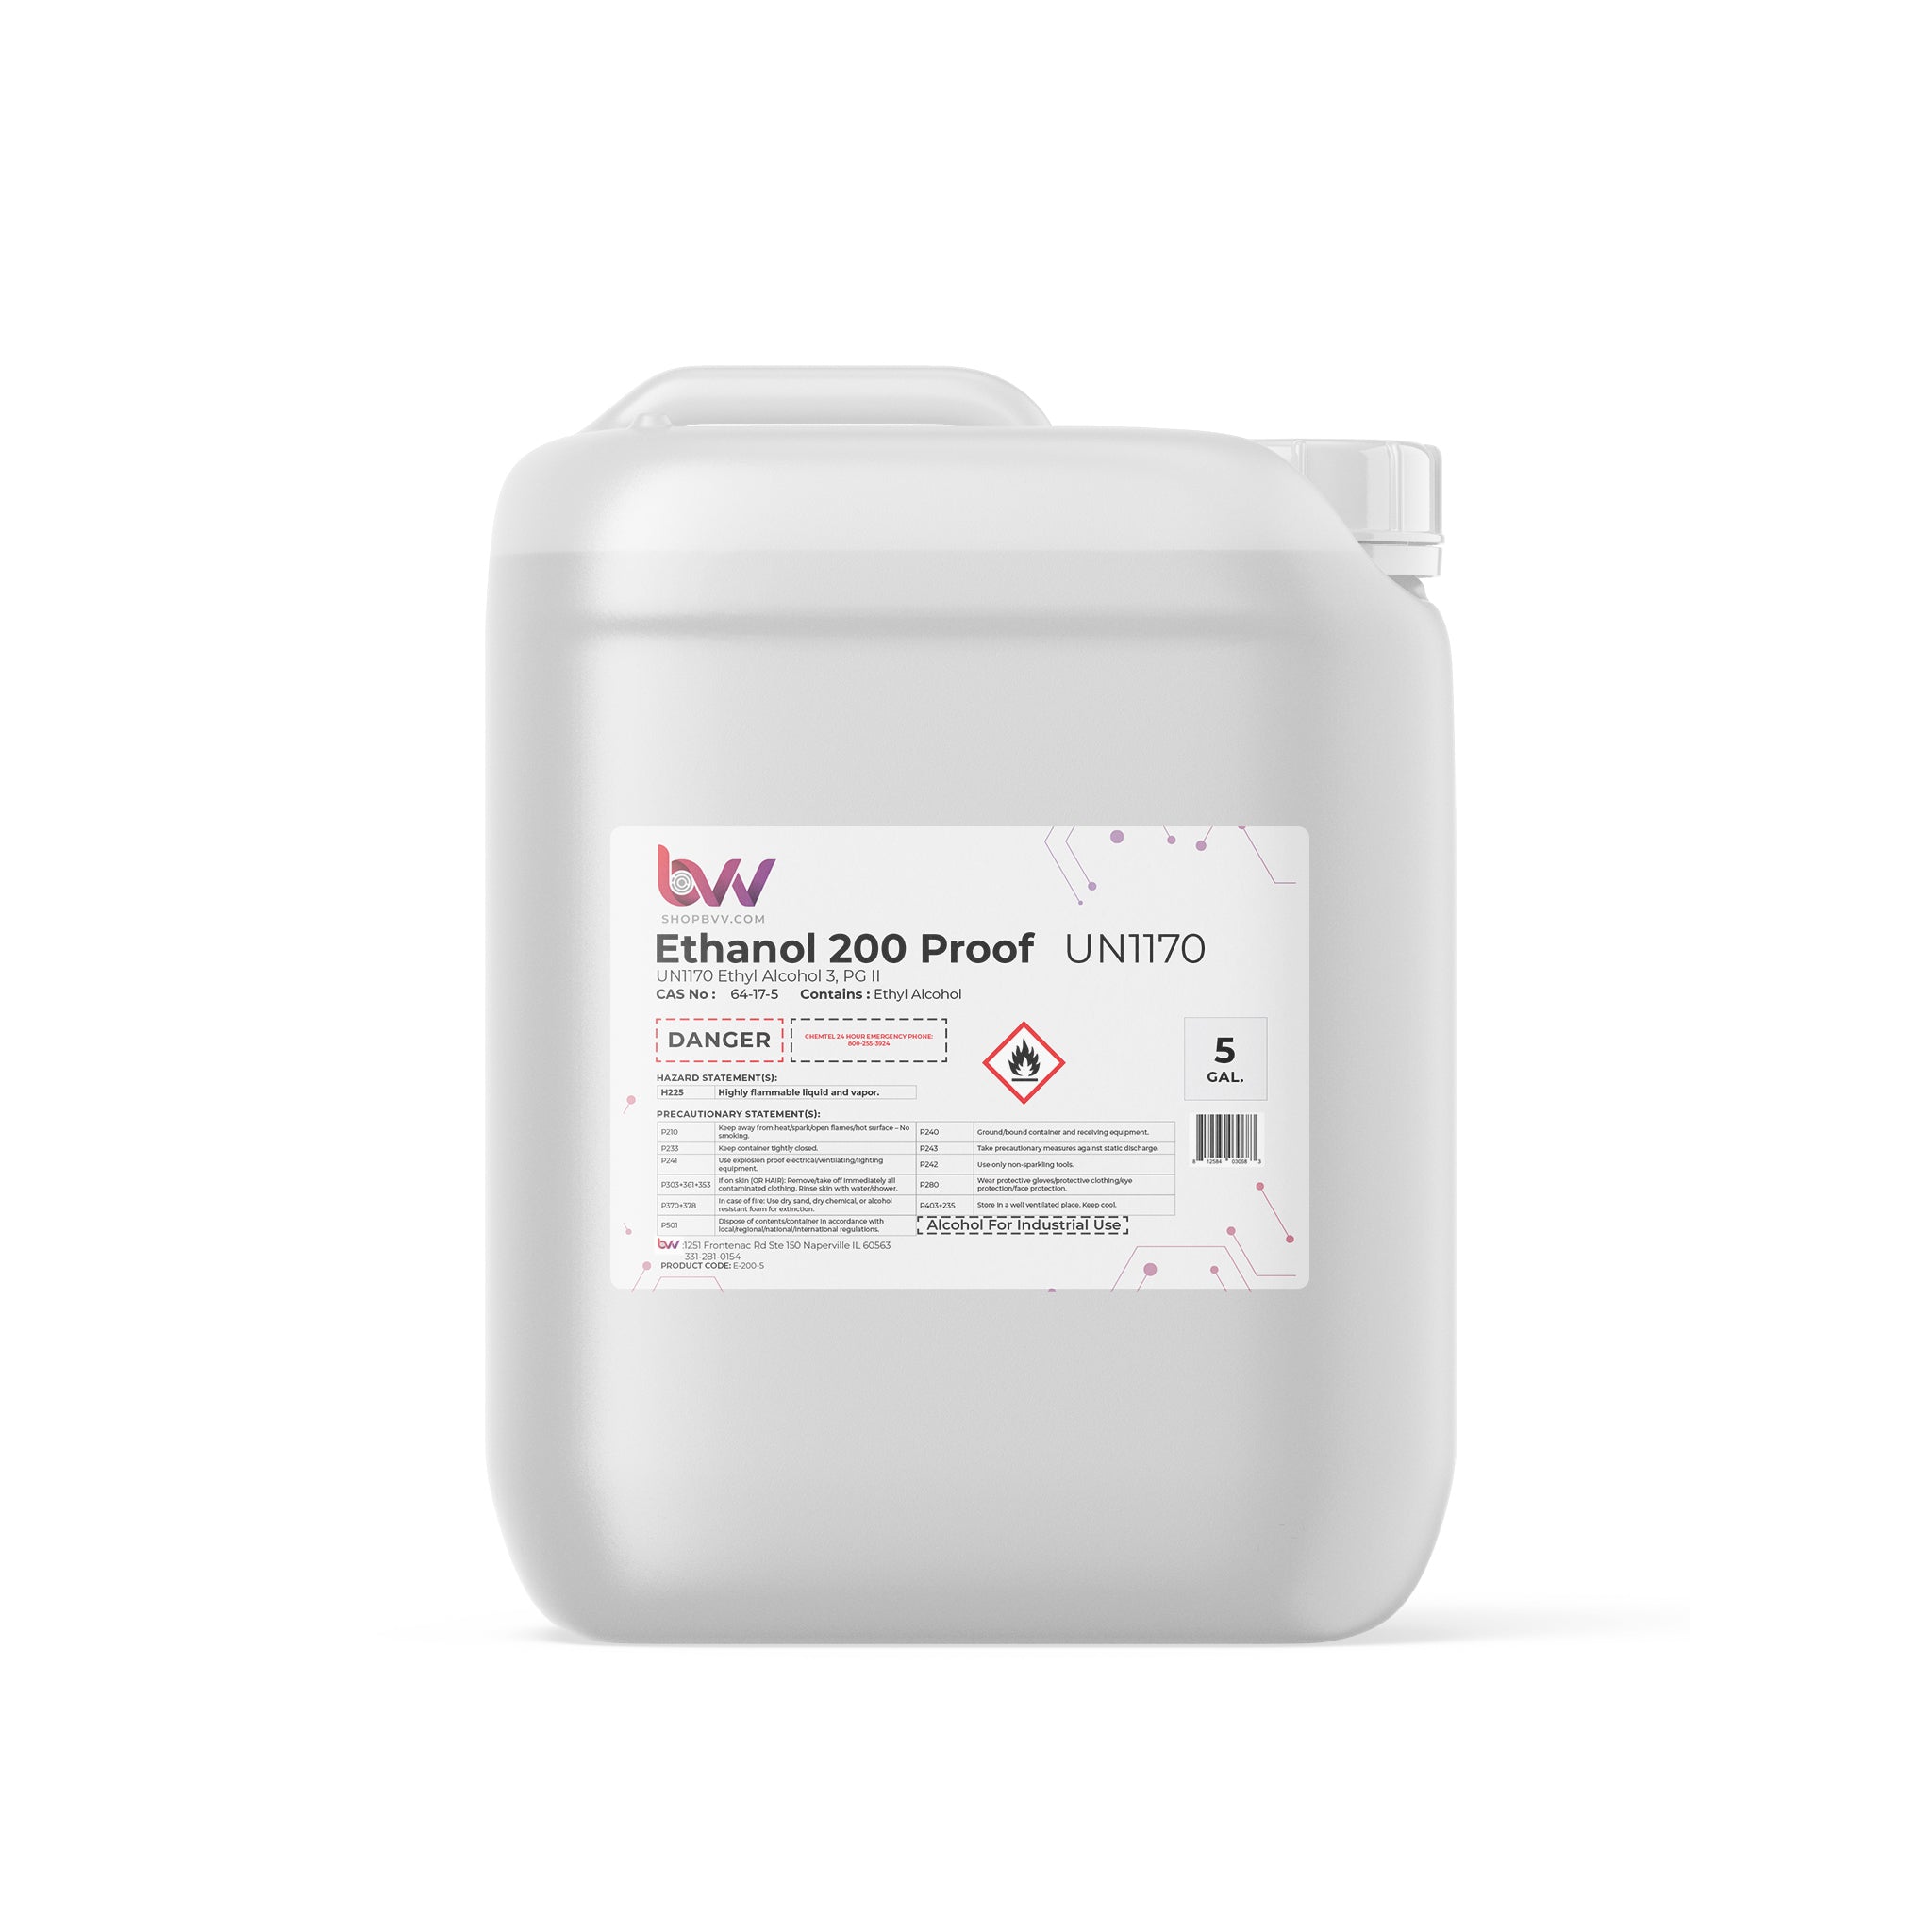 BVV™ Food & Lab Grade 200 Proof Ethanol - 99.97% - USP-NF, Kosher - Excise Tax Included